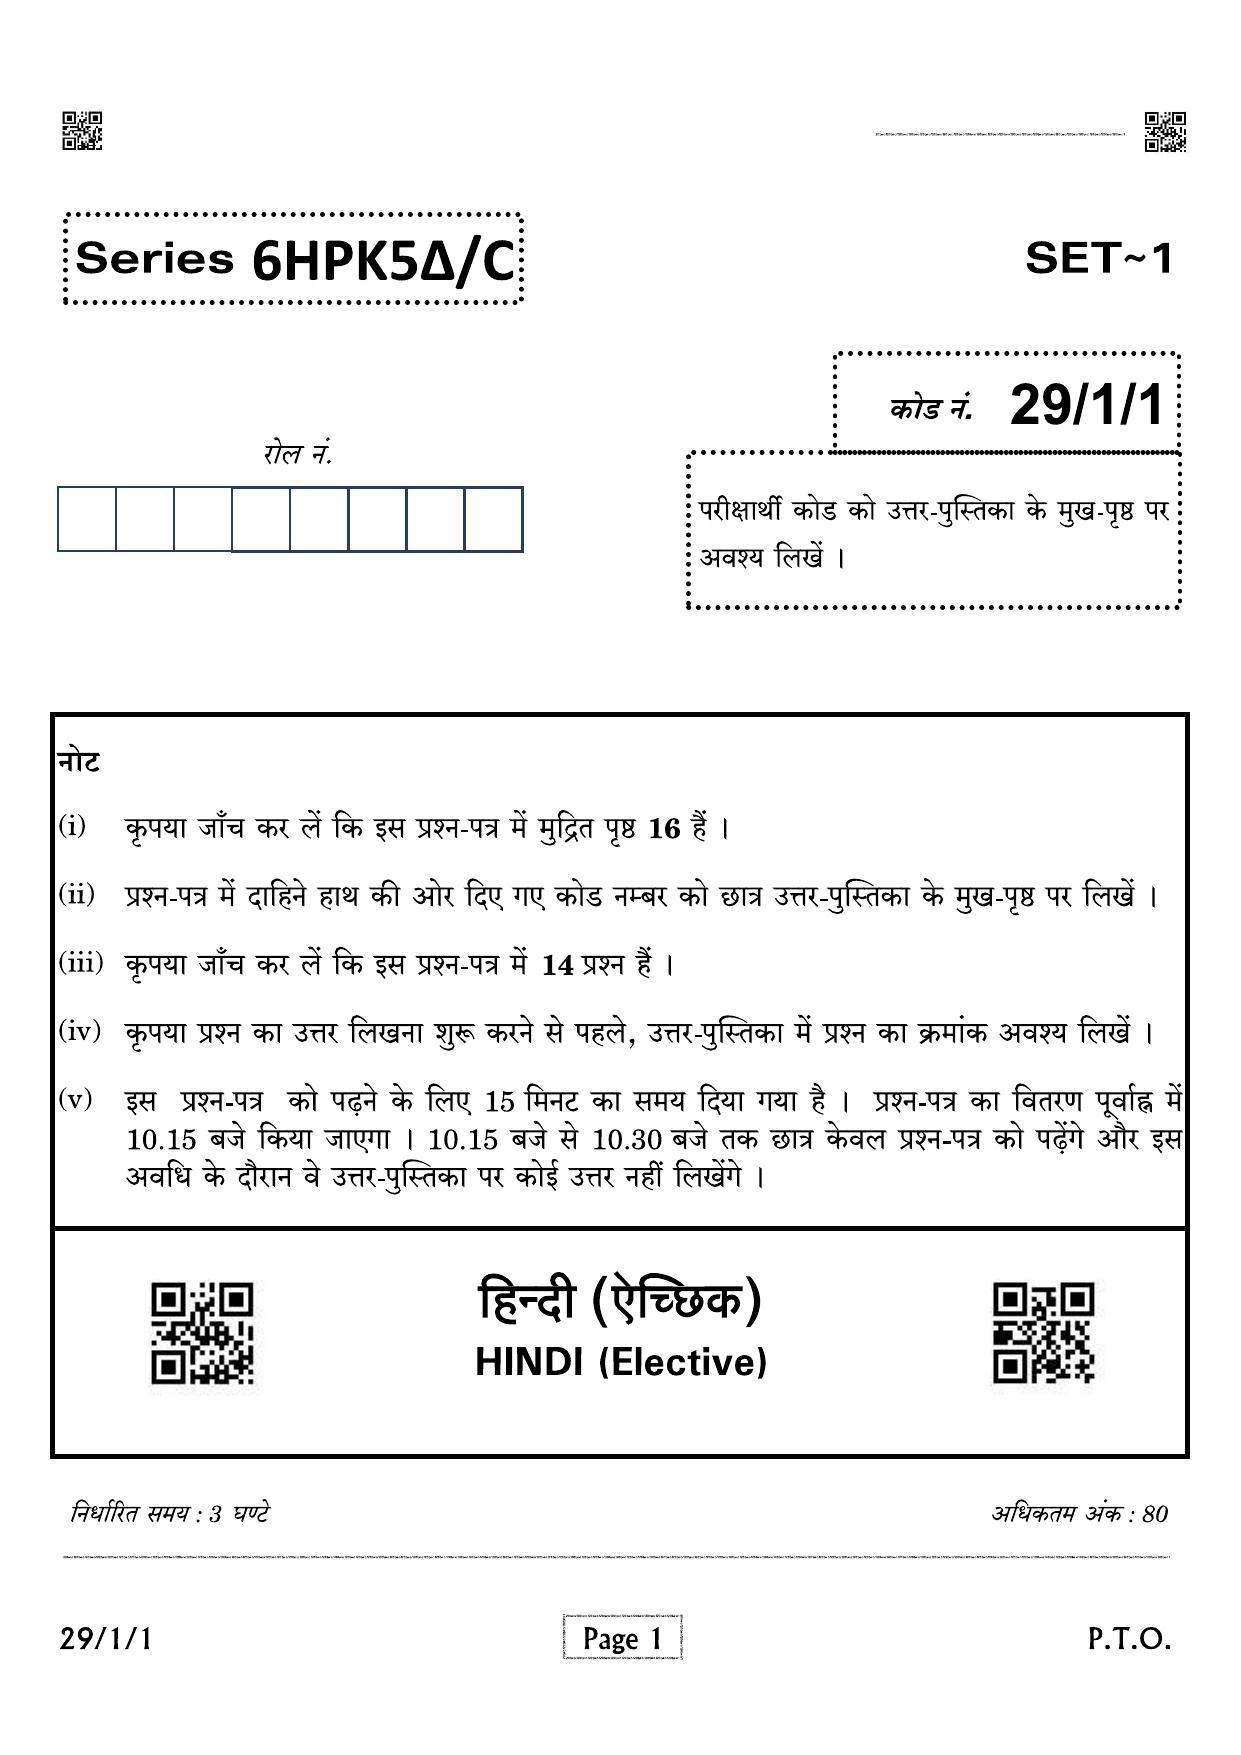 CBSE Class 12 QP_002_HINDI_ELECTIVE 2021 Compartment Question Paper - Page 1